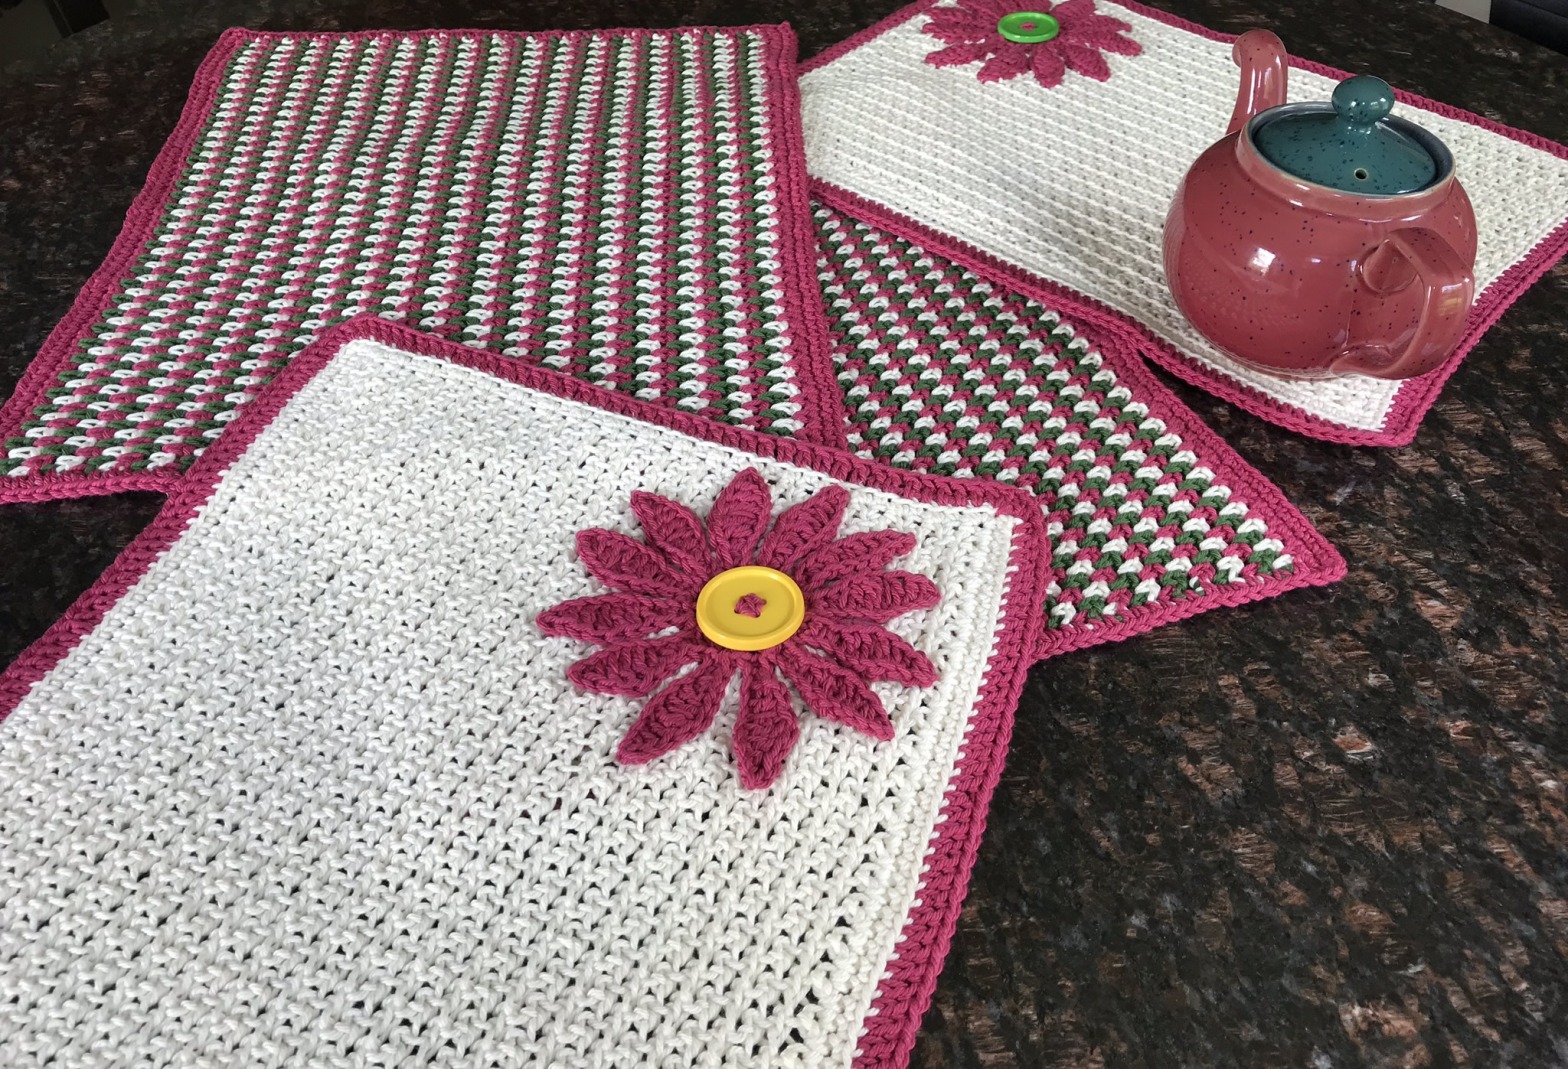 Crocheted placemats in red, green, and white with a tea pot